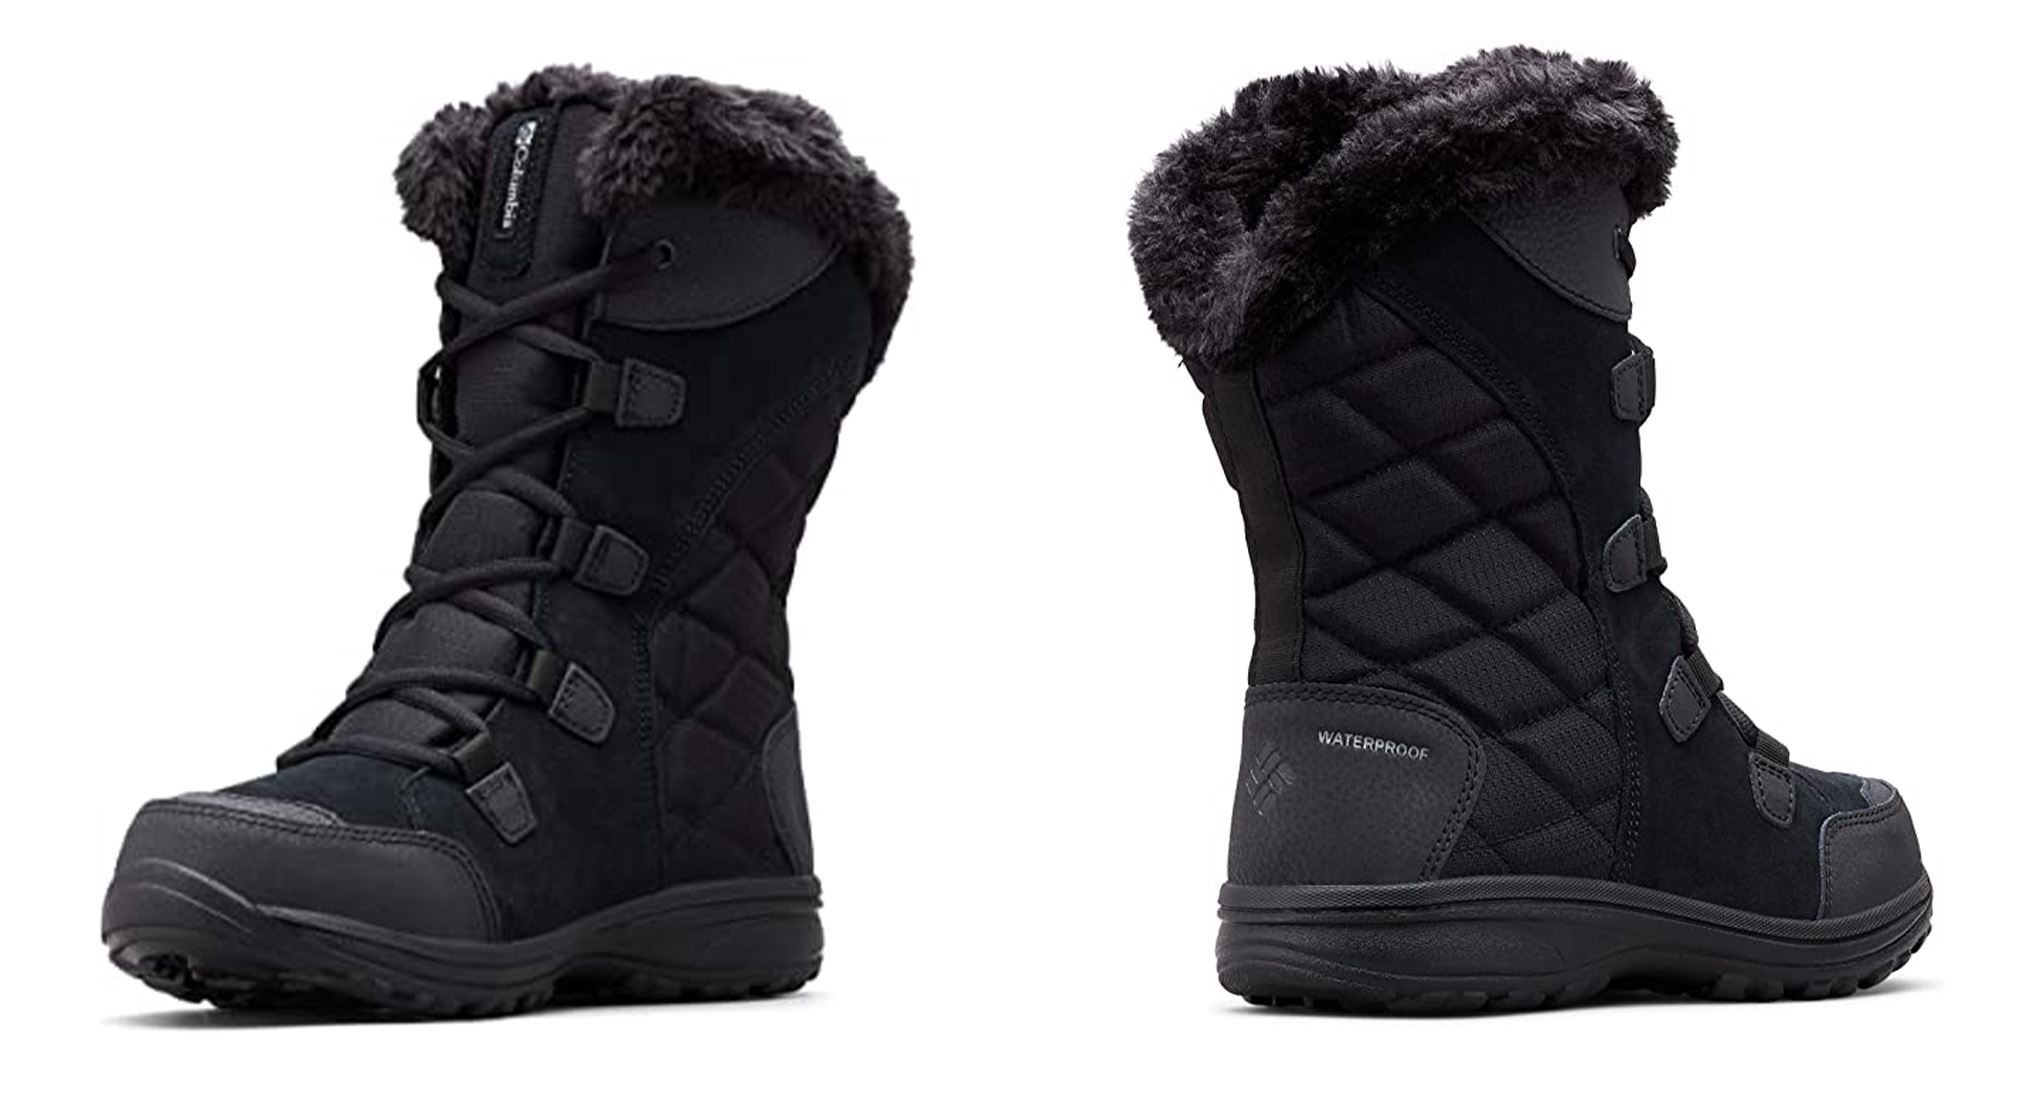 The BEST Winter Boots (Lightweight, Warm, and Packable)